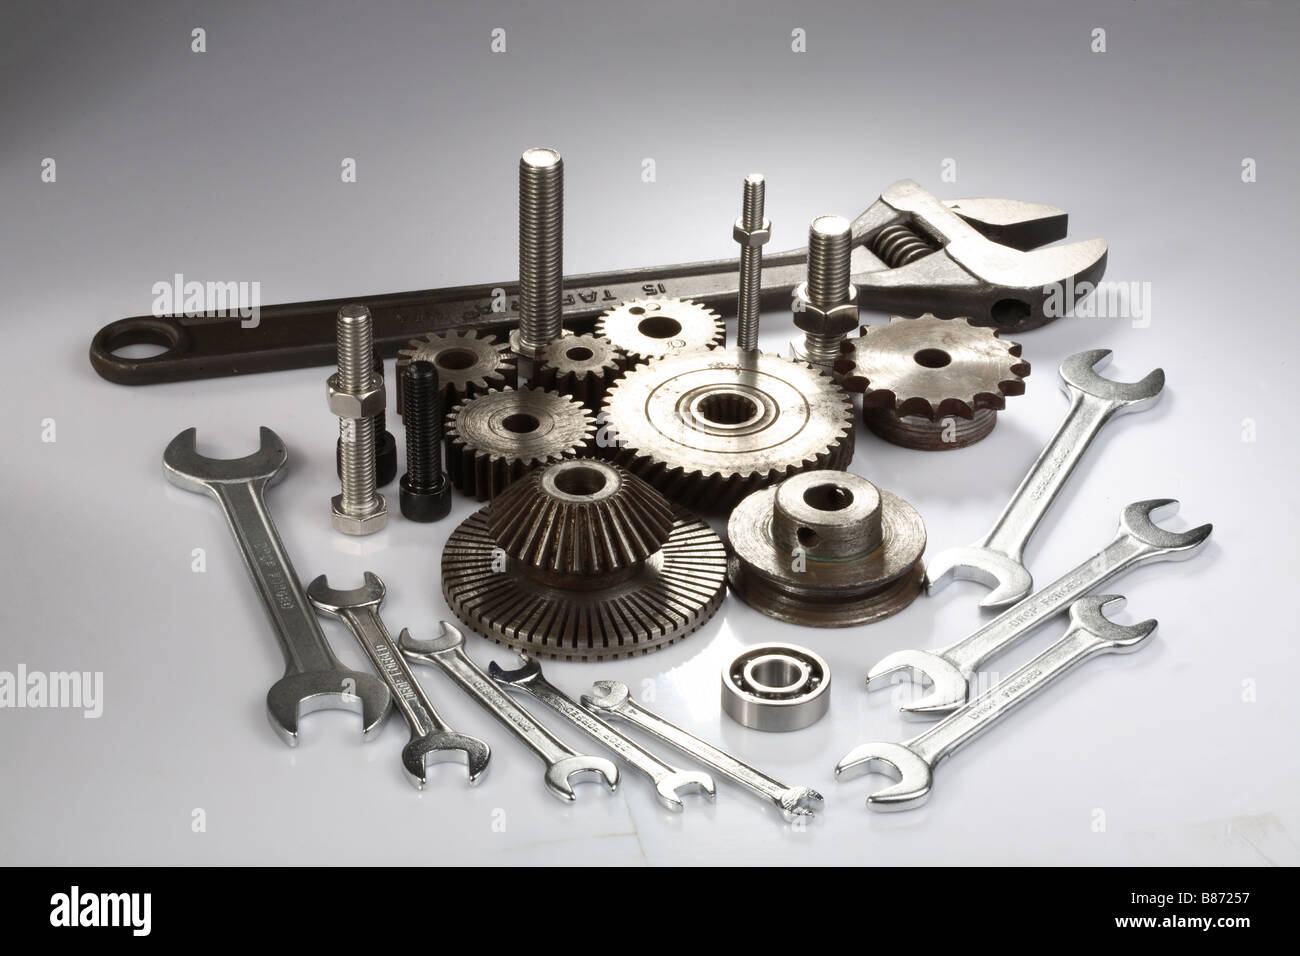 Mechanical devices and tools Stock Photo